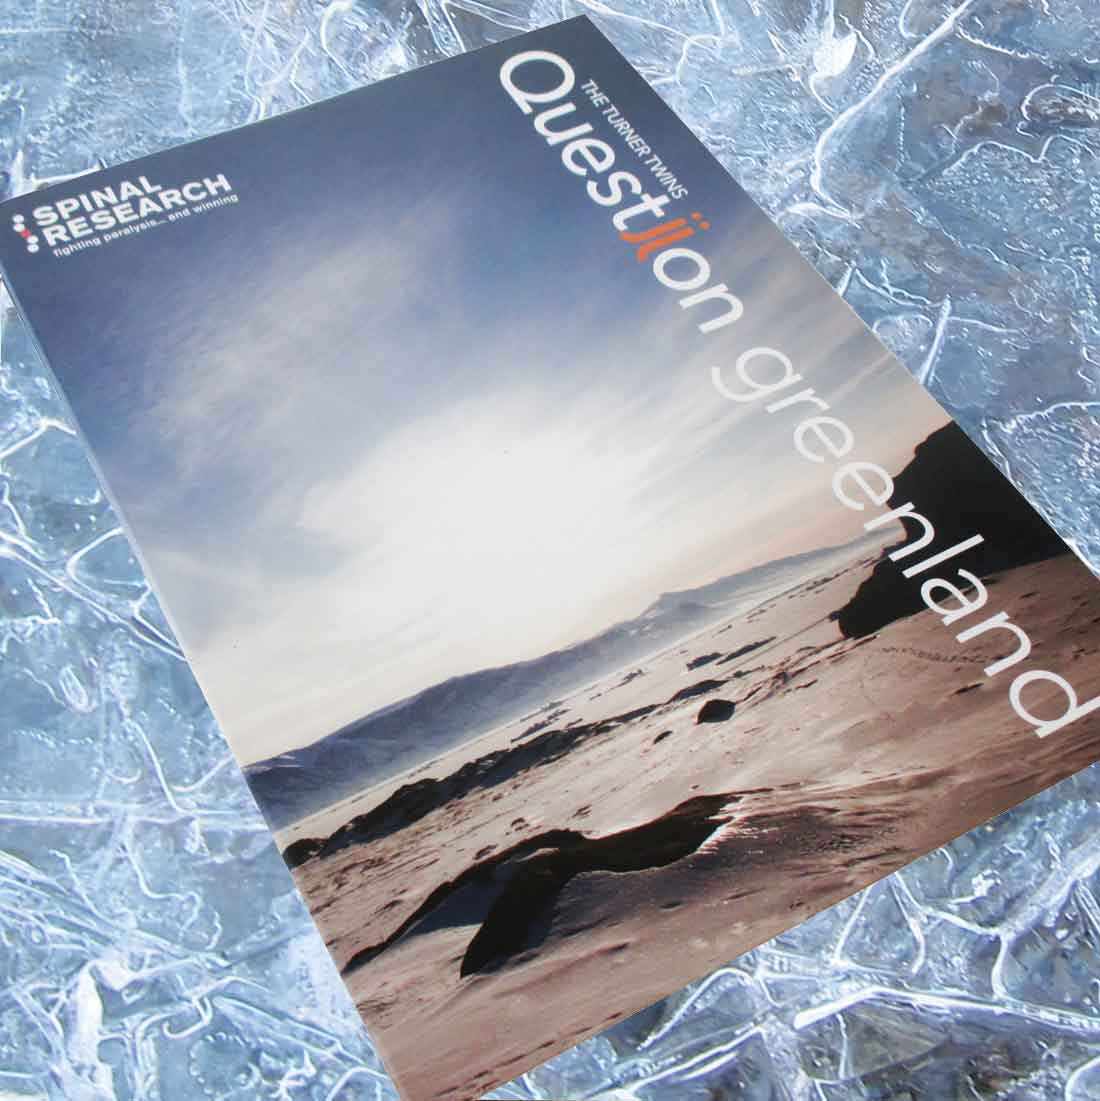 Fundraising Pack for Greenland Trek charity event for Spinal Research designed by ideology design and marketing